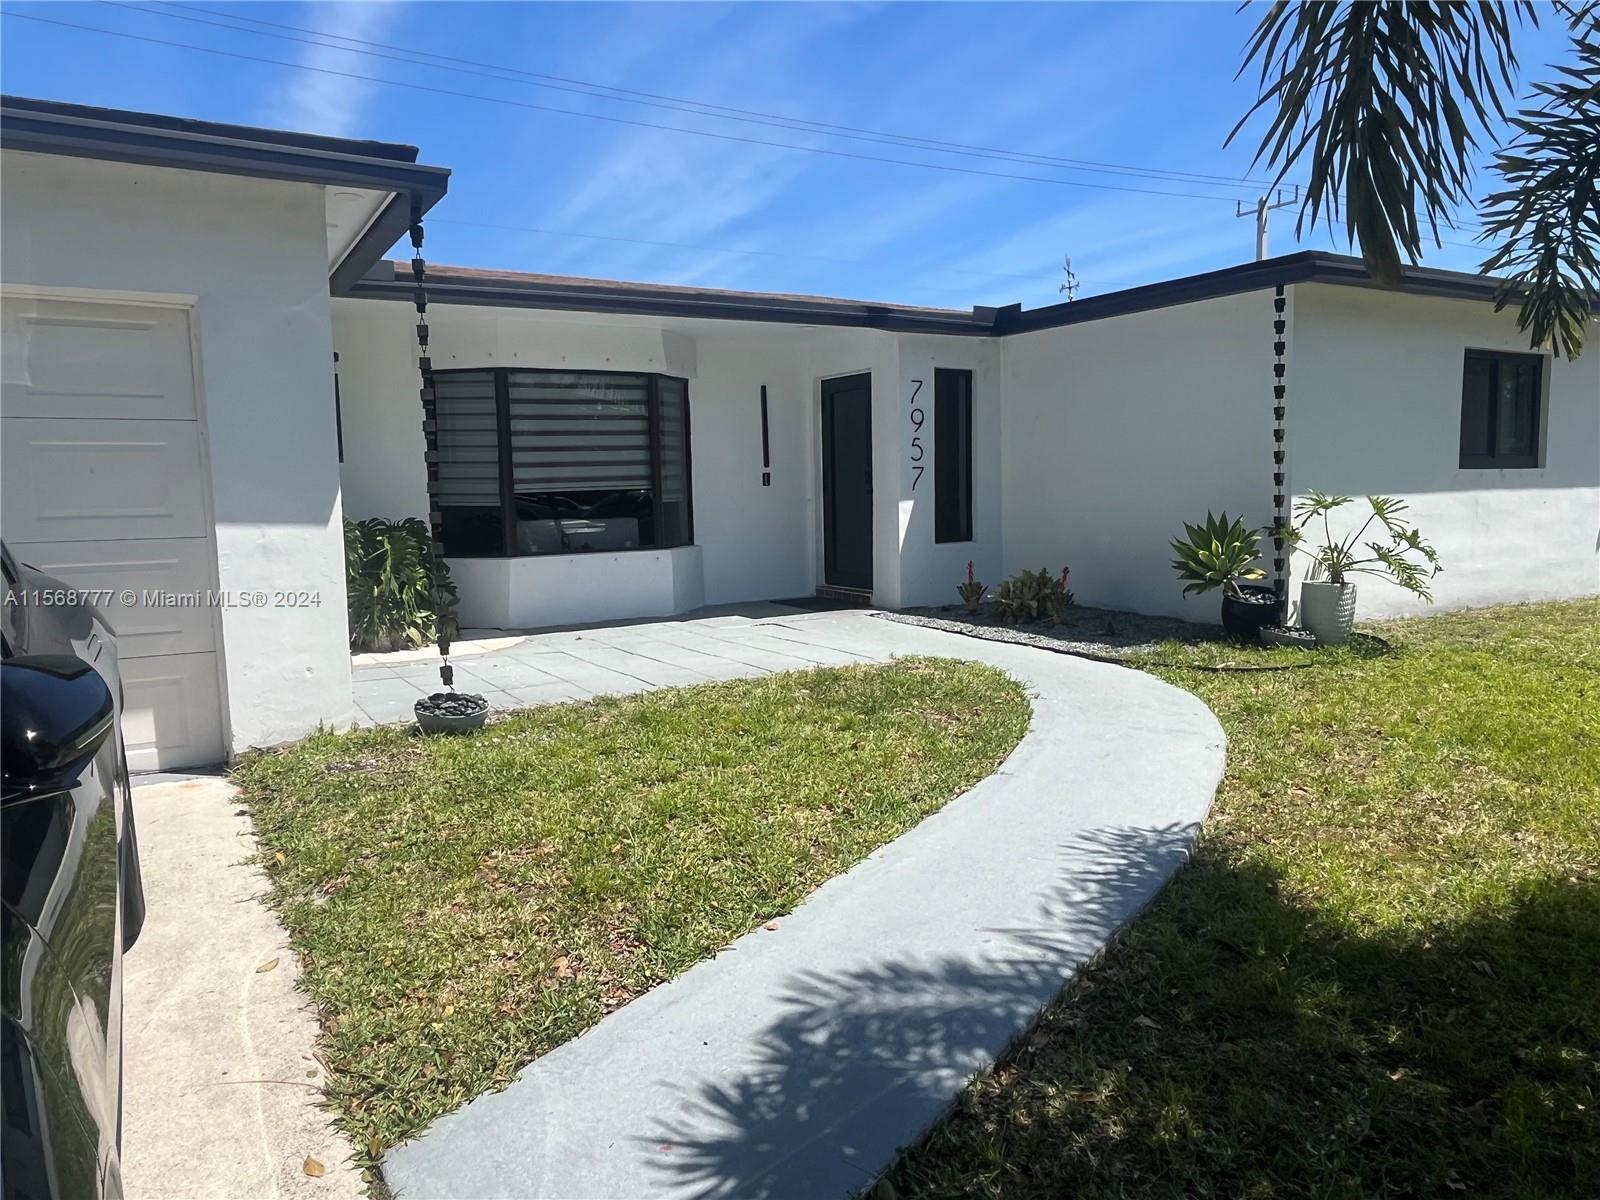 Photo of 7957 NW 3rd Pl in Margate, FL